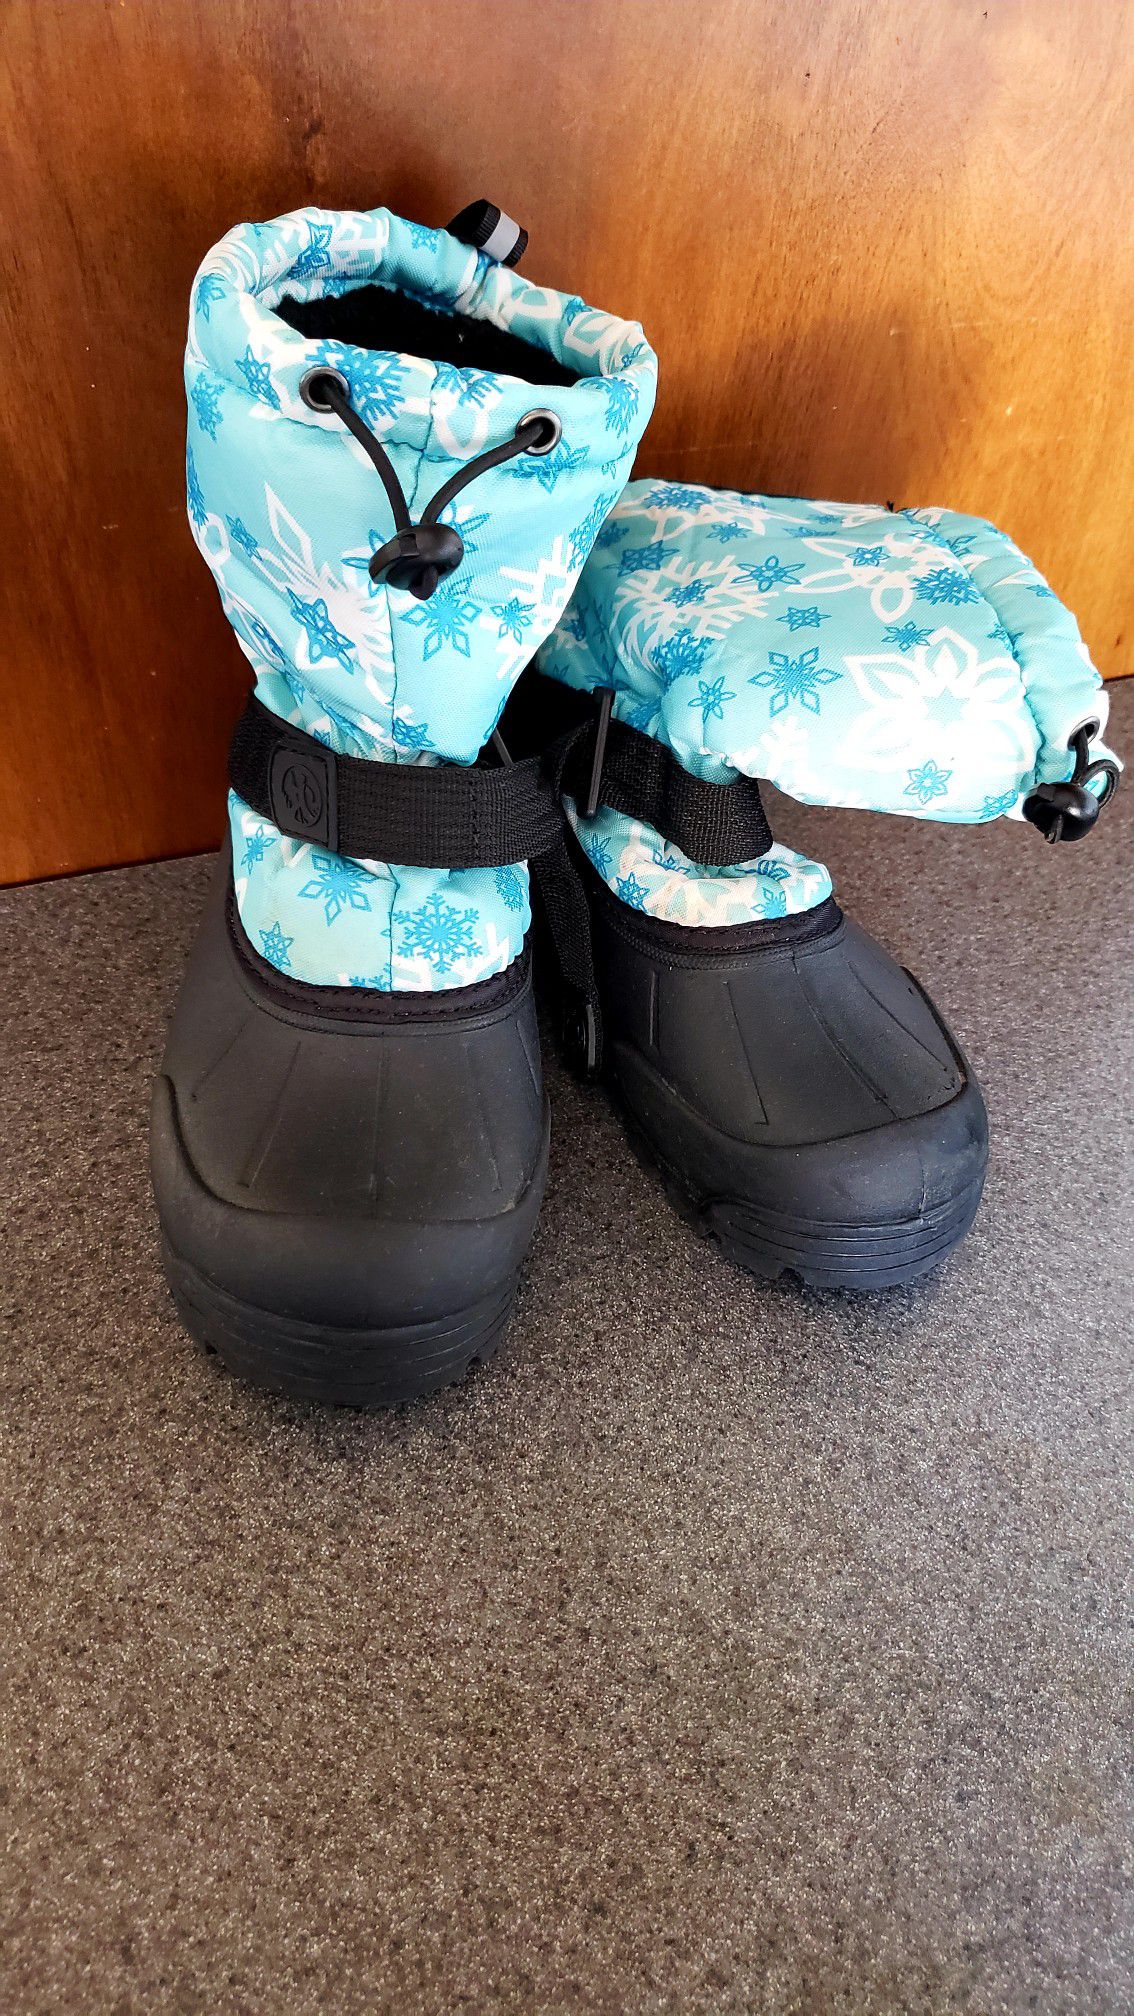 Girls snow boots size 4 $20